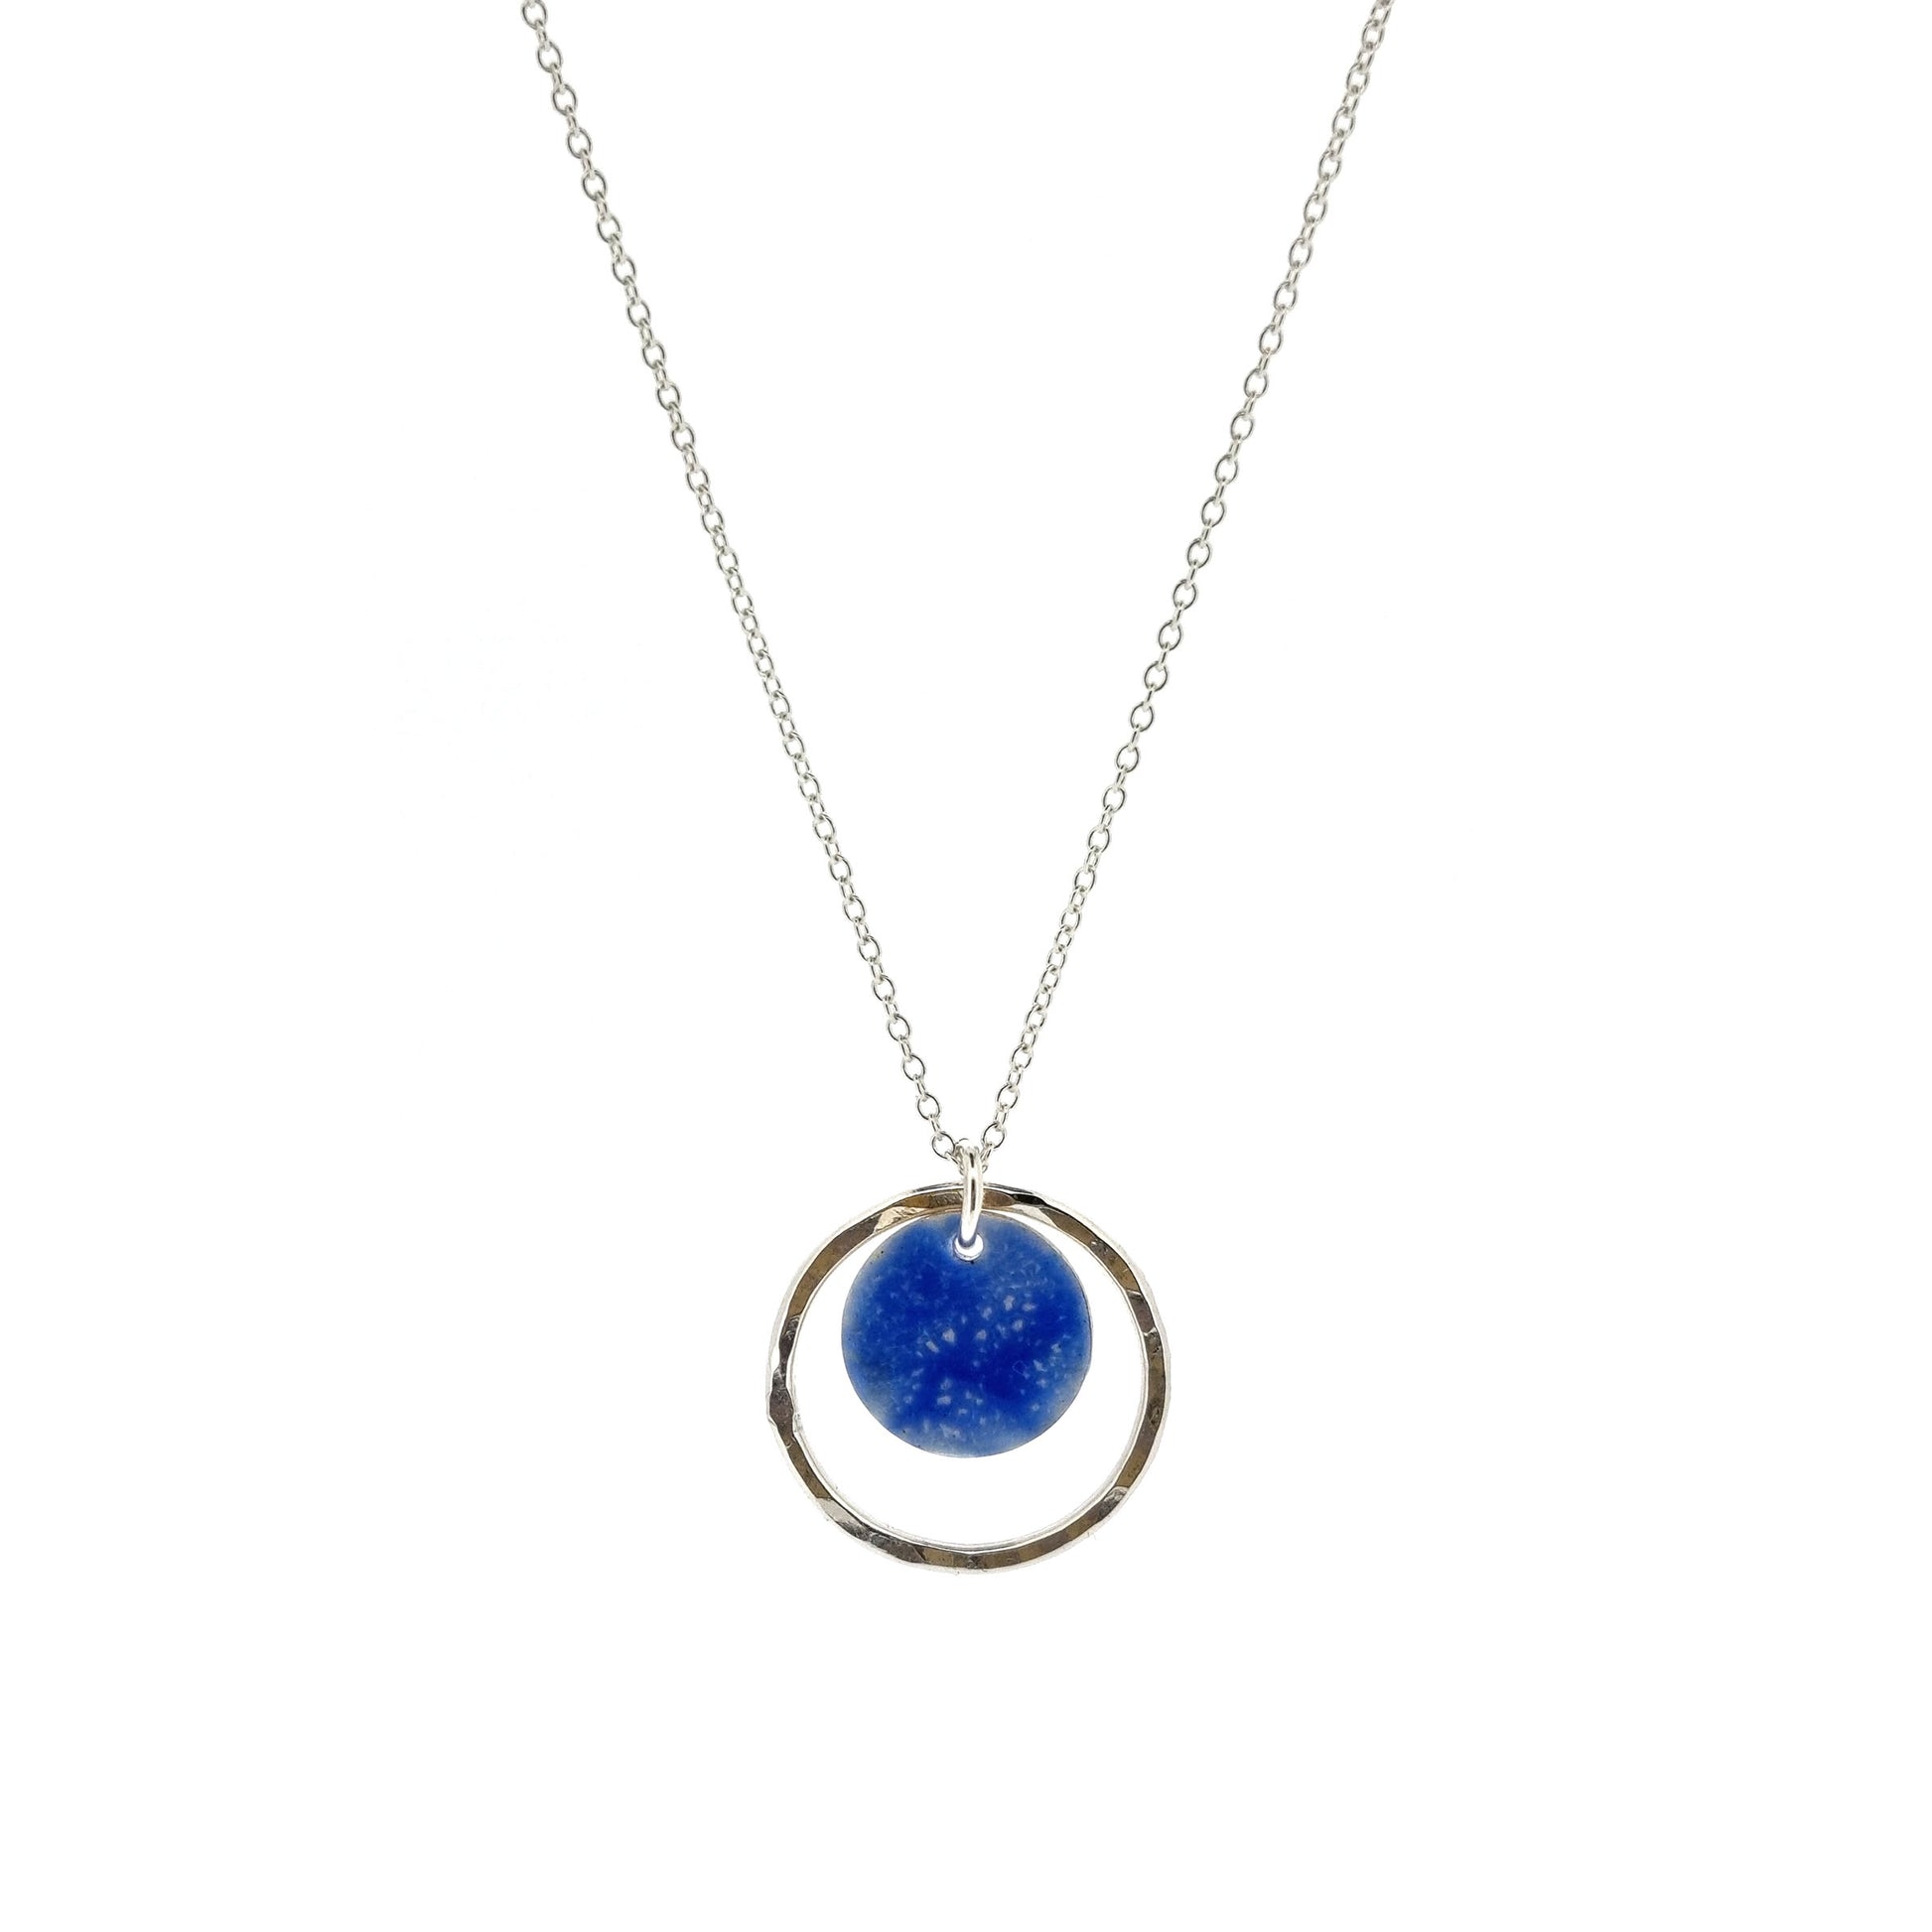 A silver pendant with a central disc with a blue patterned enamel surrounded by a silver hammered open circle. On a silver chain.